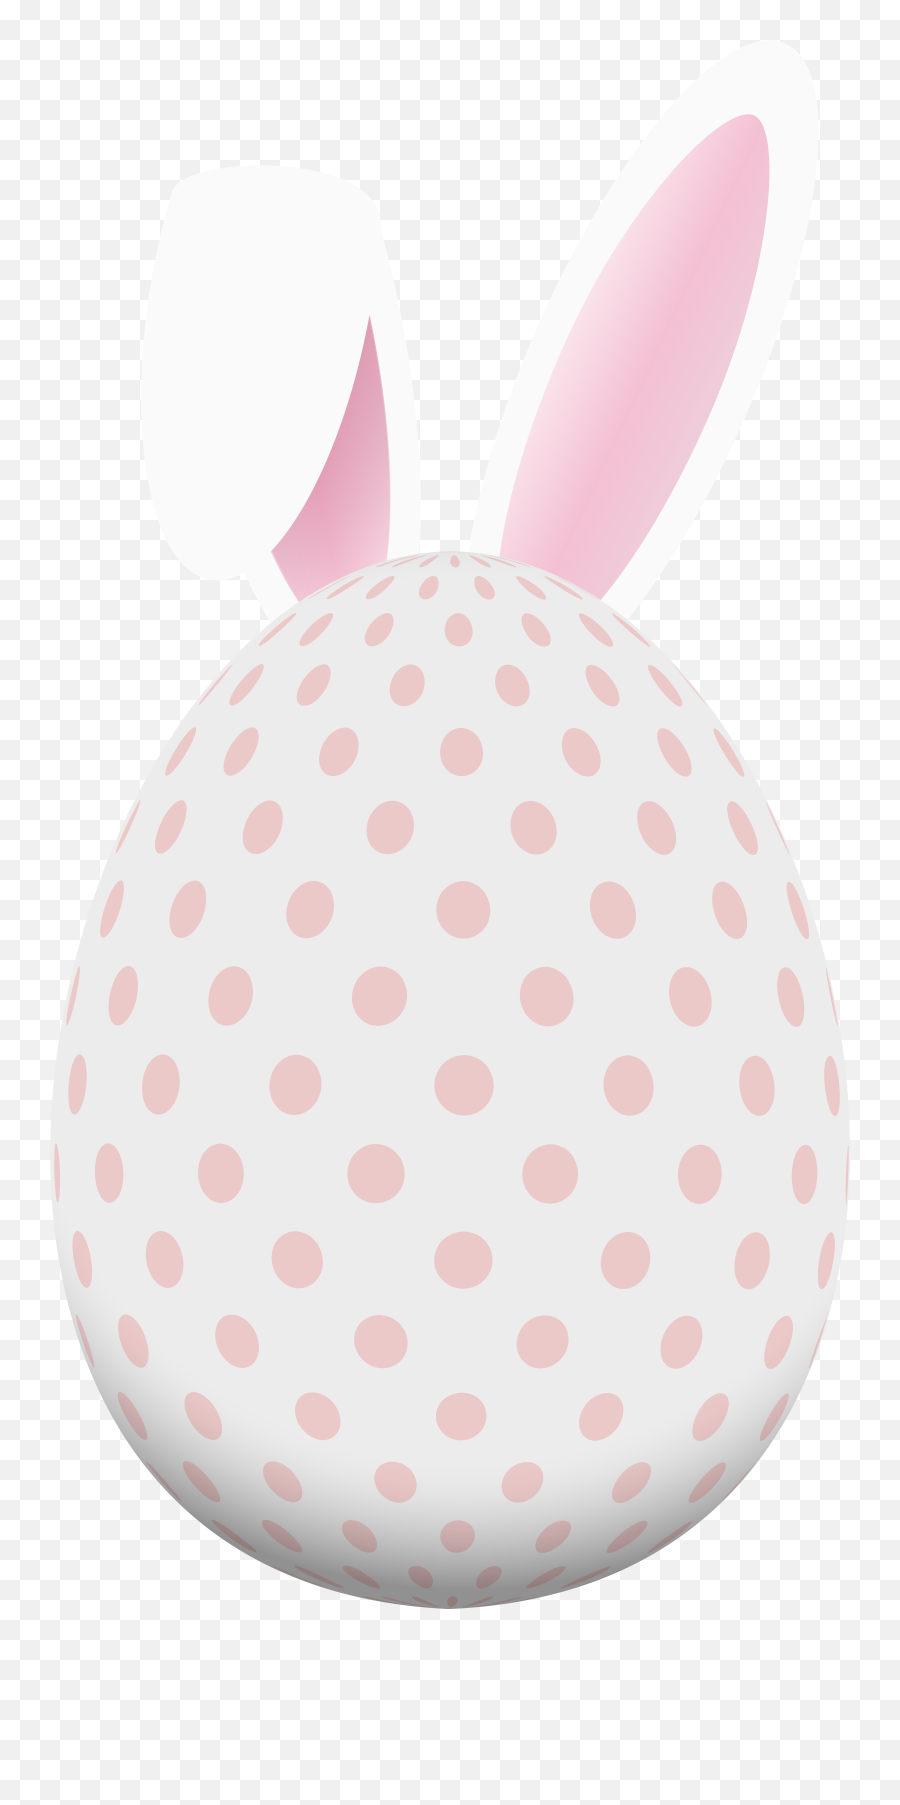 Bunny Png Egg With Clip Royalty Free - Easter Egg With Bunny Ears Emoji,Rabbit Egg Emoji